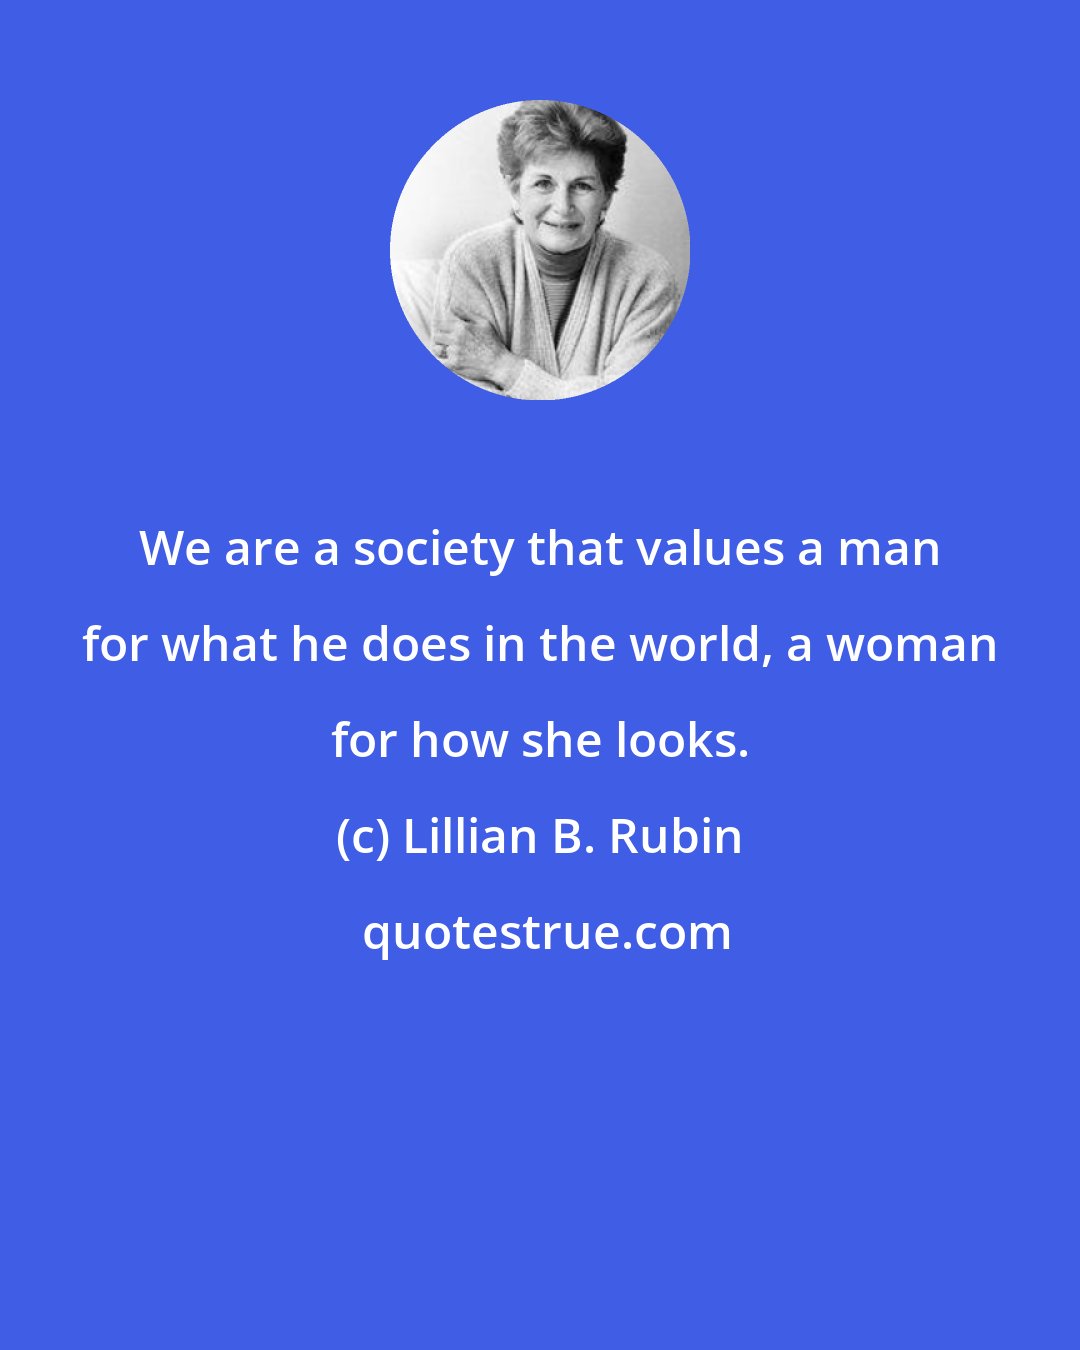 Lillian B. Rubin: We are a society that values a man for what he does in the world, a woman for how she looks.